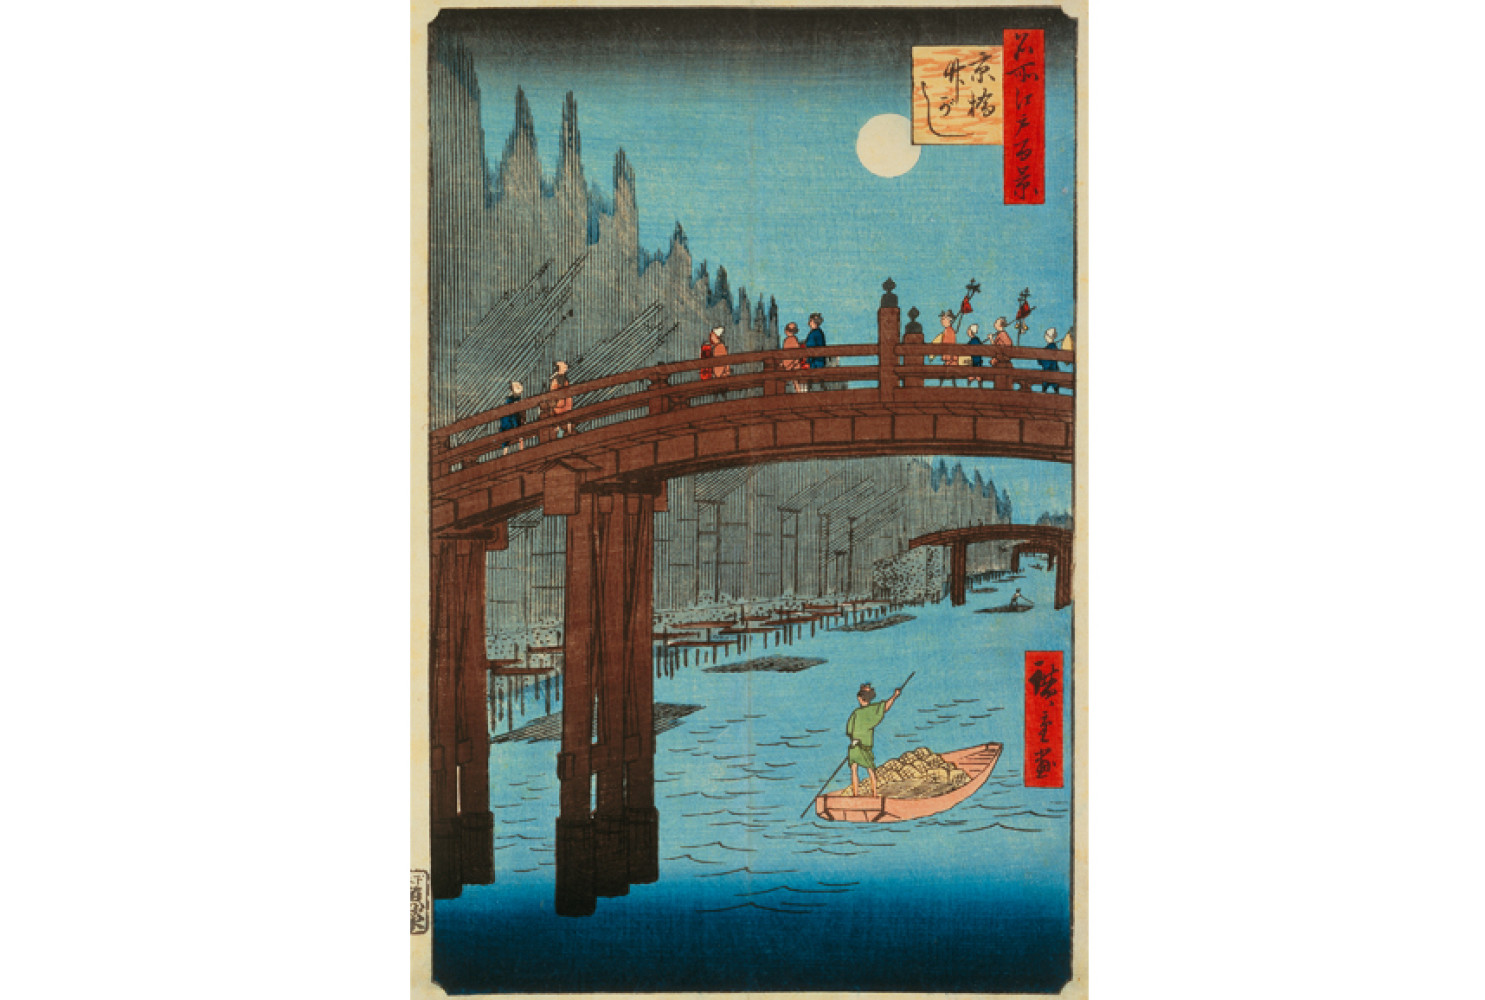 The Bamboo Yards, Kyobashi Bridge, no. 76 from the series One-hundred Views of Famous Places in Edo, 1857, by Ichirysai Hiroshige (Japanese, 1797-1858); woodblock print on paper; 13 3/8 x 8 5/8 inches; Gift of Mary Alston Read Simms from the collection of Motte Alston Read Simms in memory of him and his mother, Jane Ladson Alston Read; 1948.004.0374